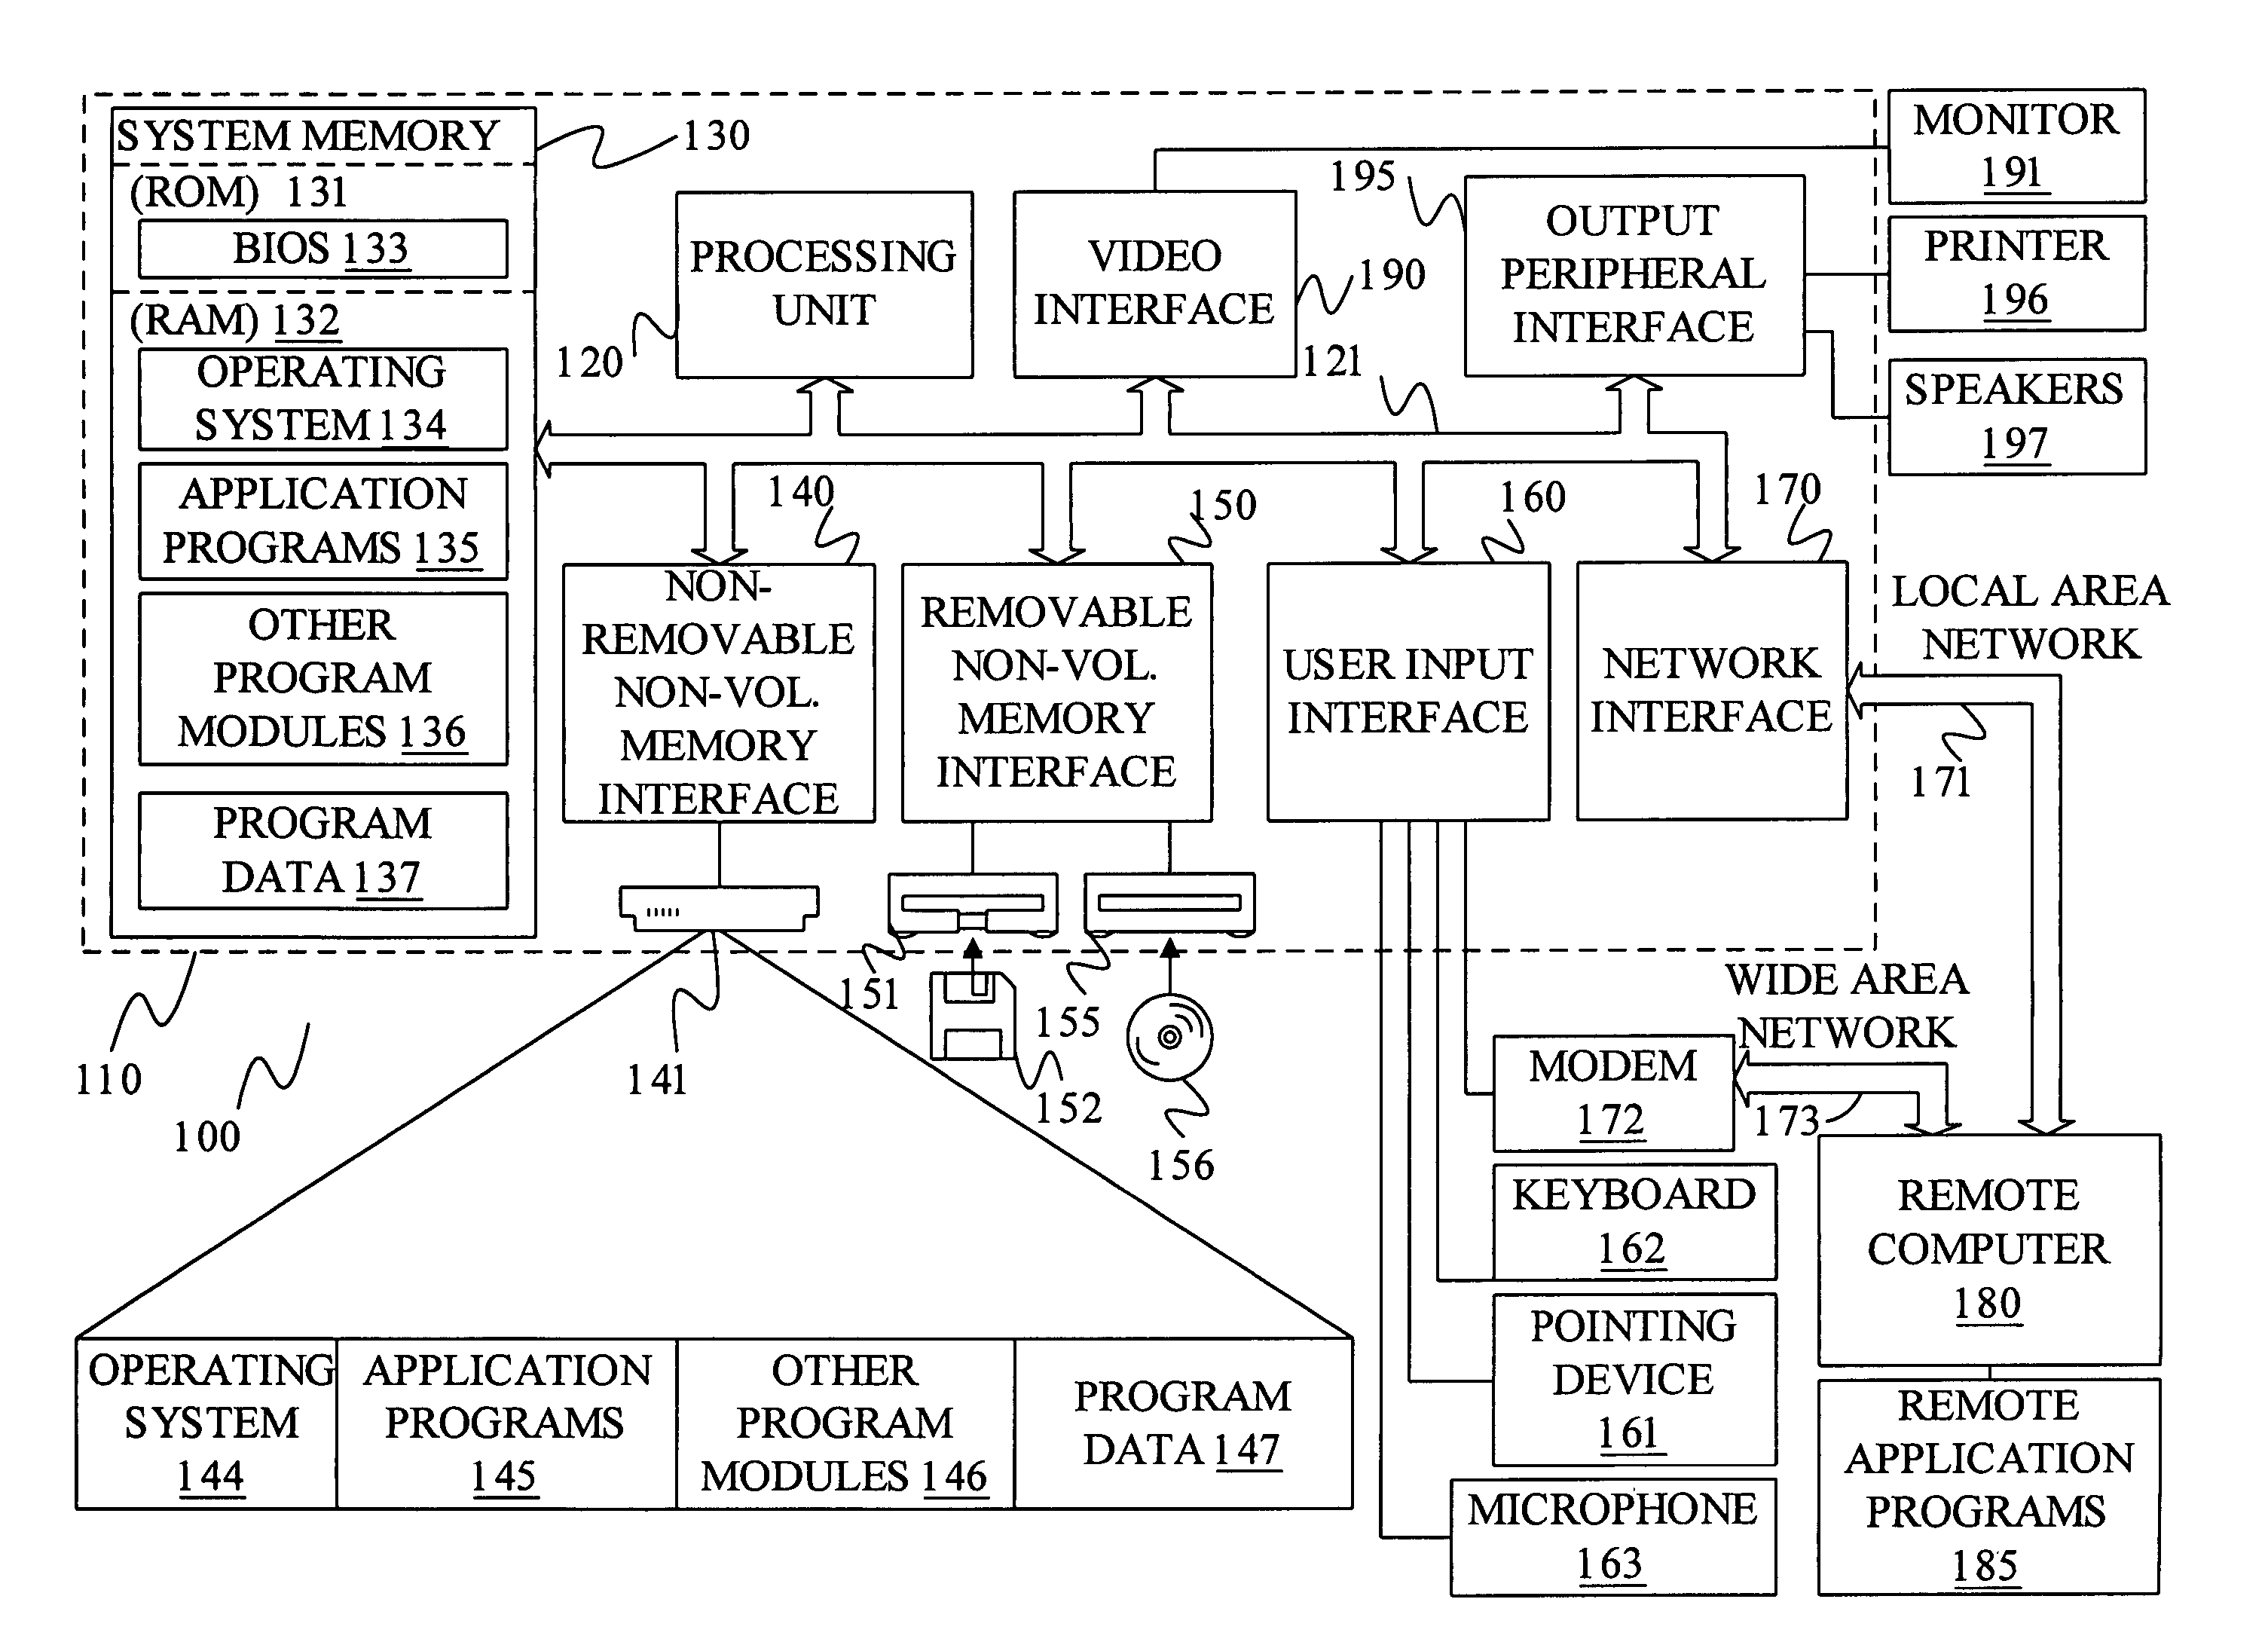 System and method for parsing unstructured data into structured data